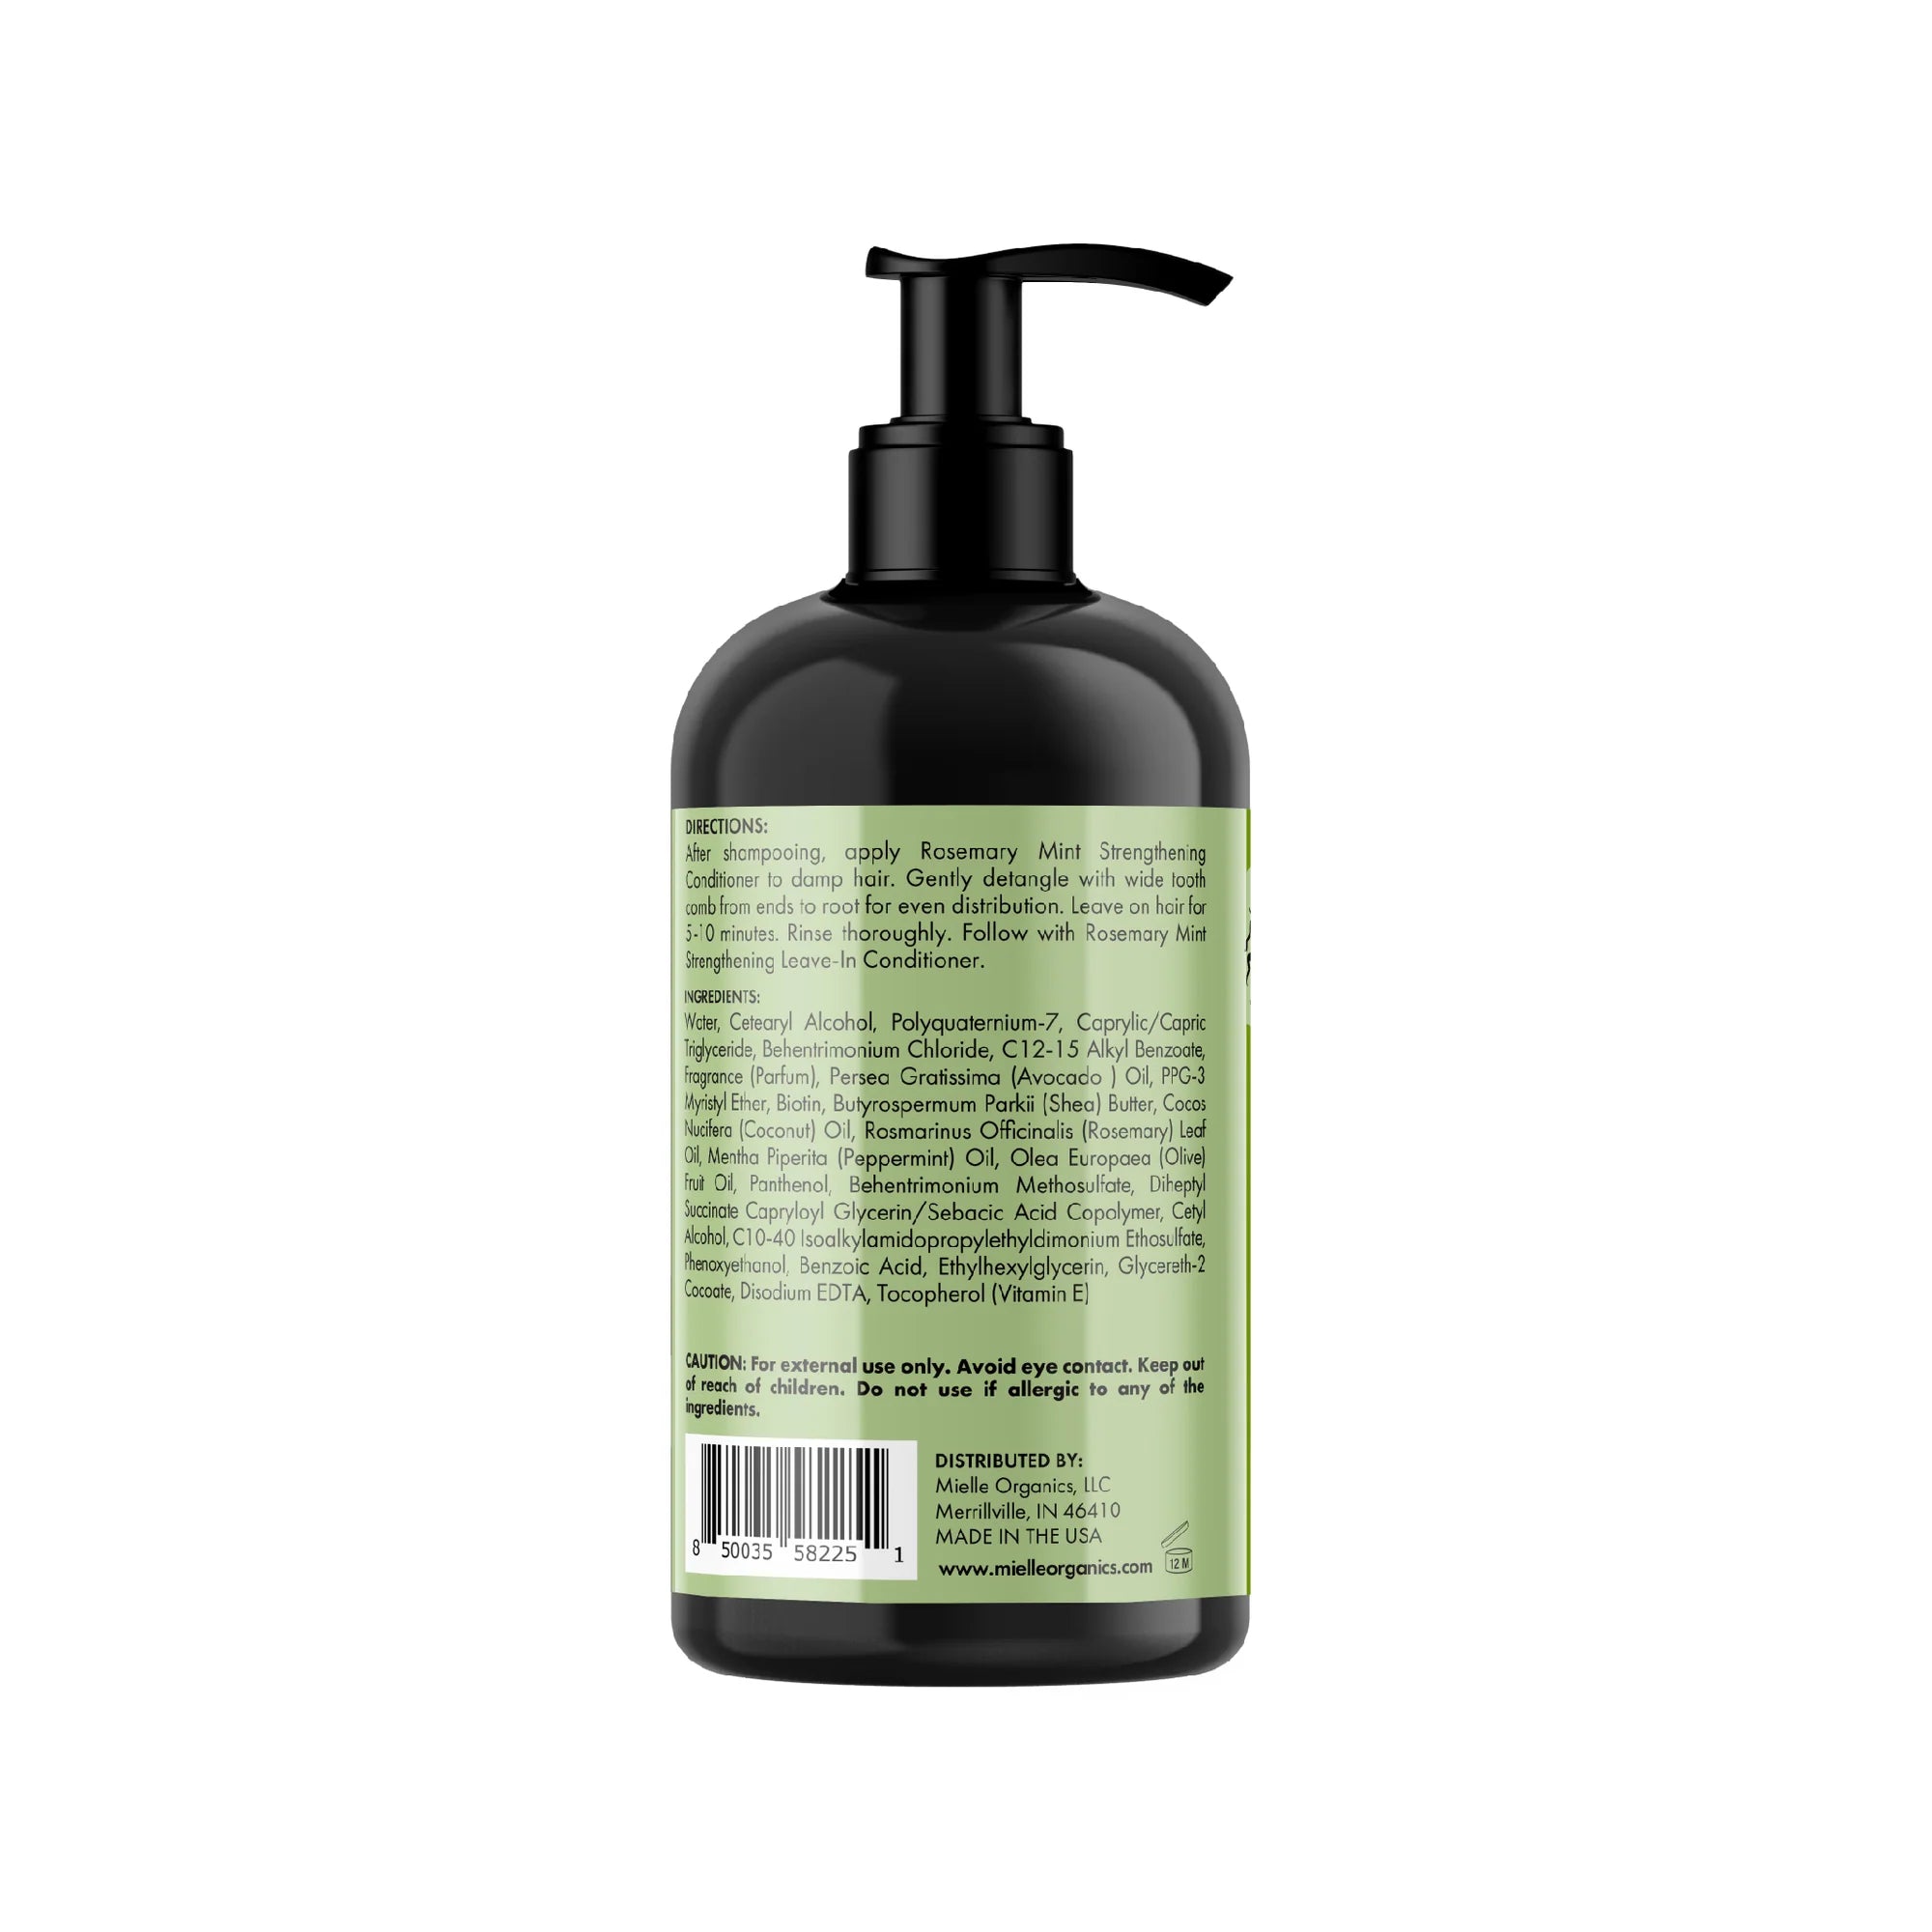 Mielle Organics Rosemary Mint Après-shampoing Fortifiant